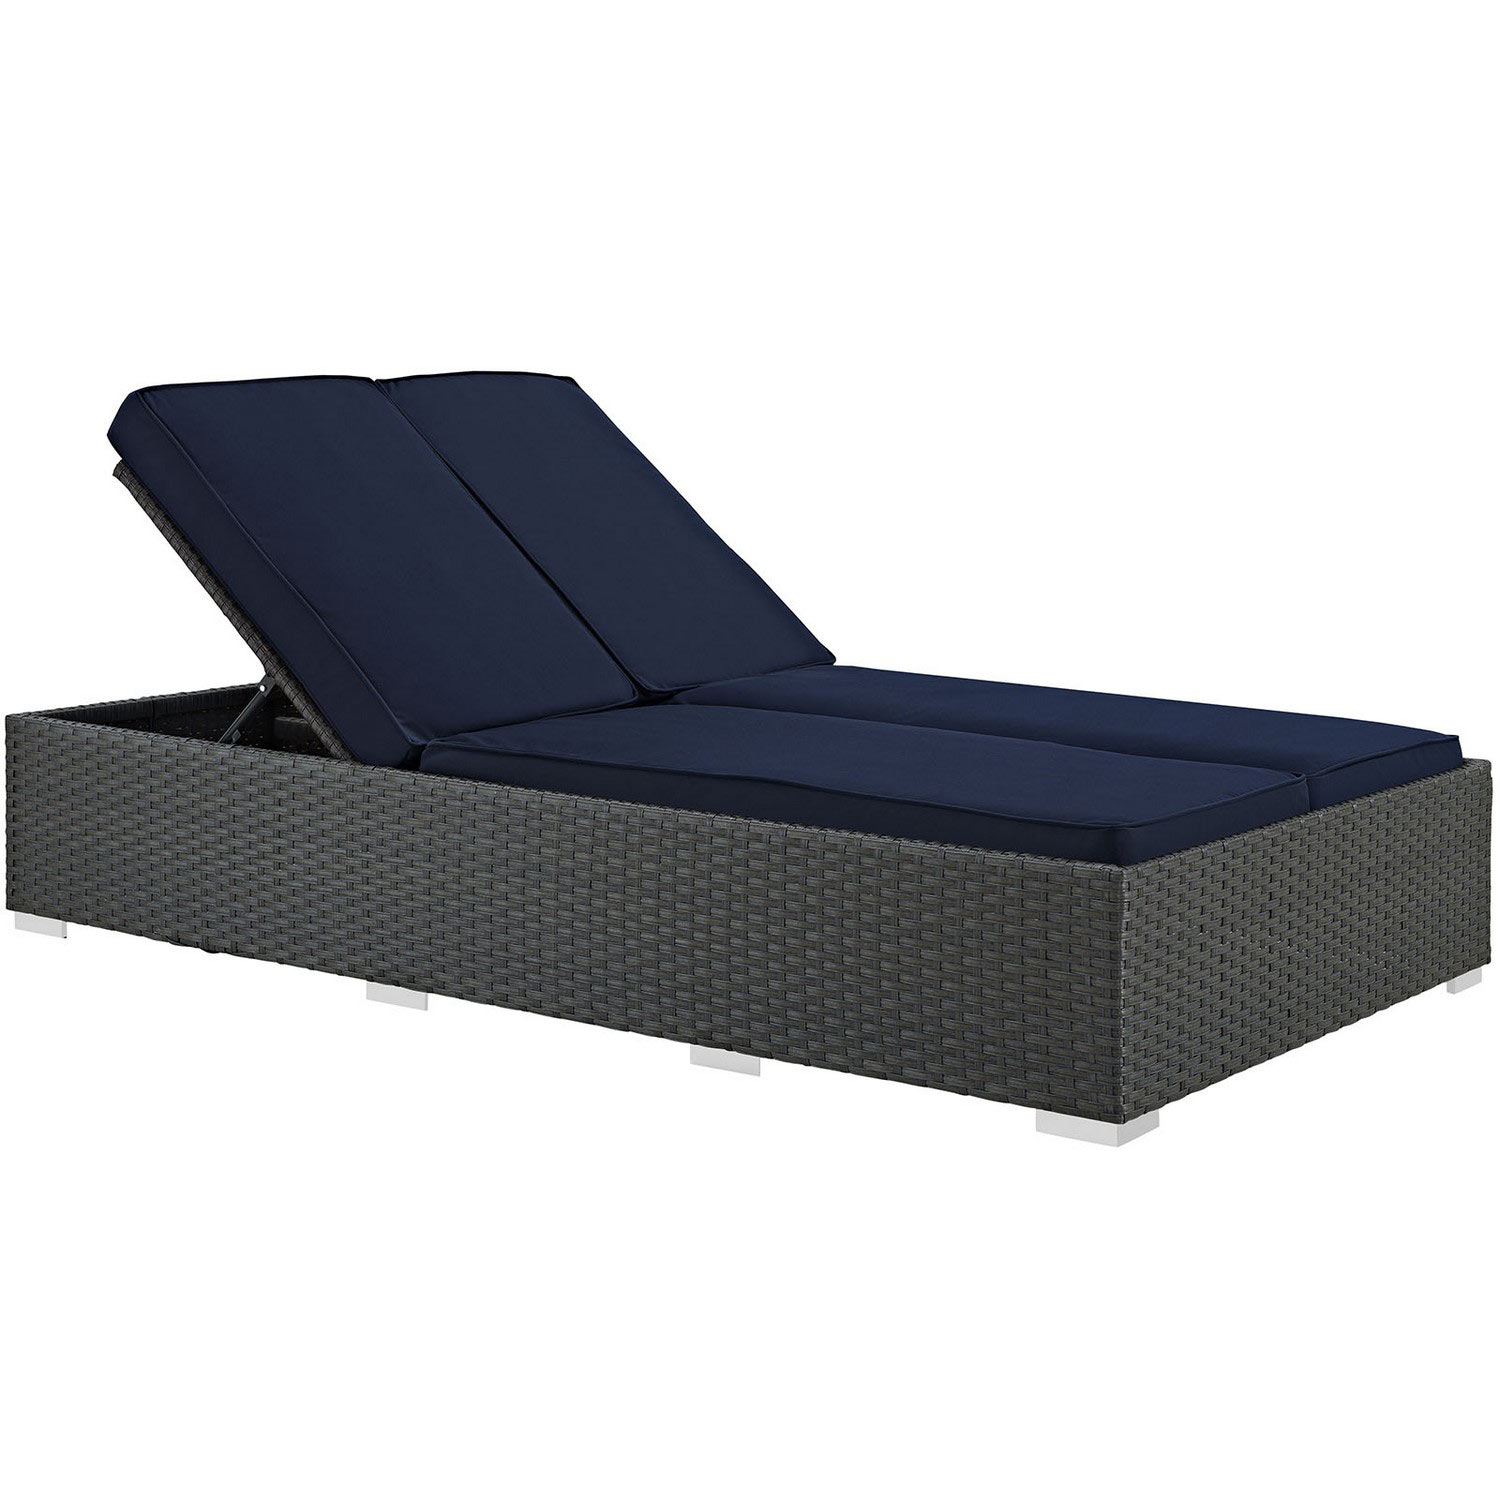 Modway Sojourn Outdoor Patio Sunbrella Double Chaise - Chocolate Navy